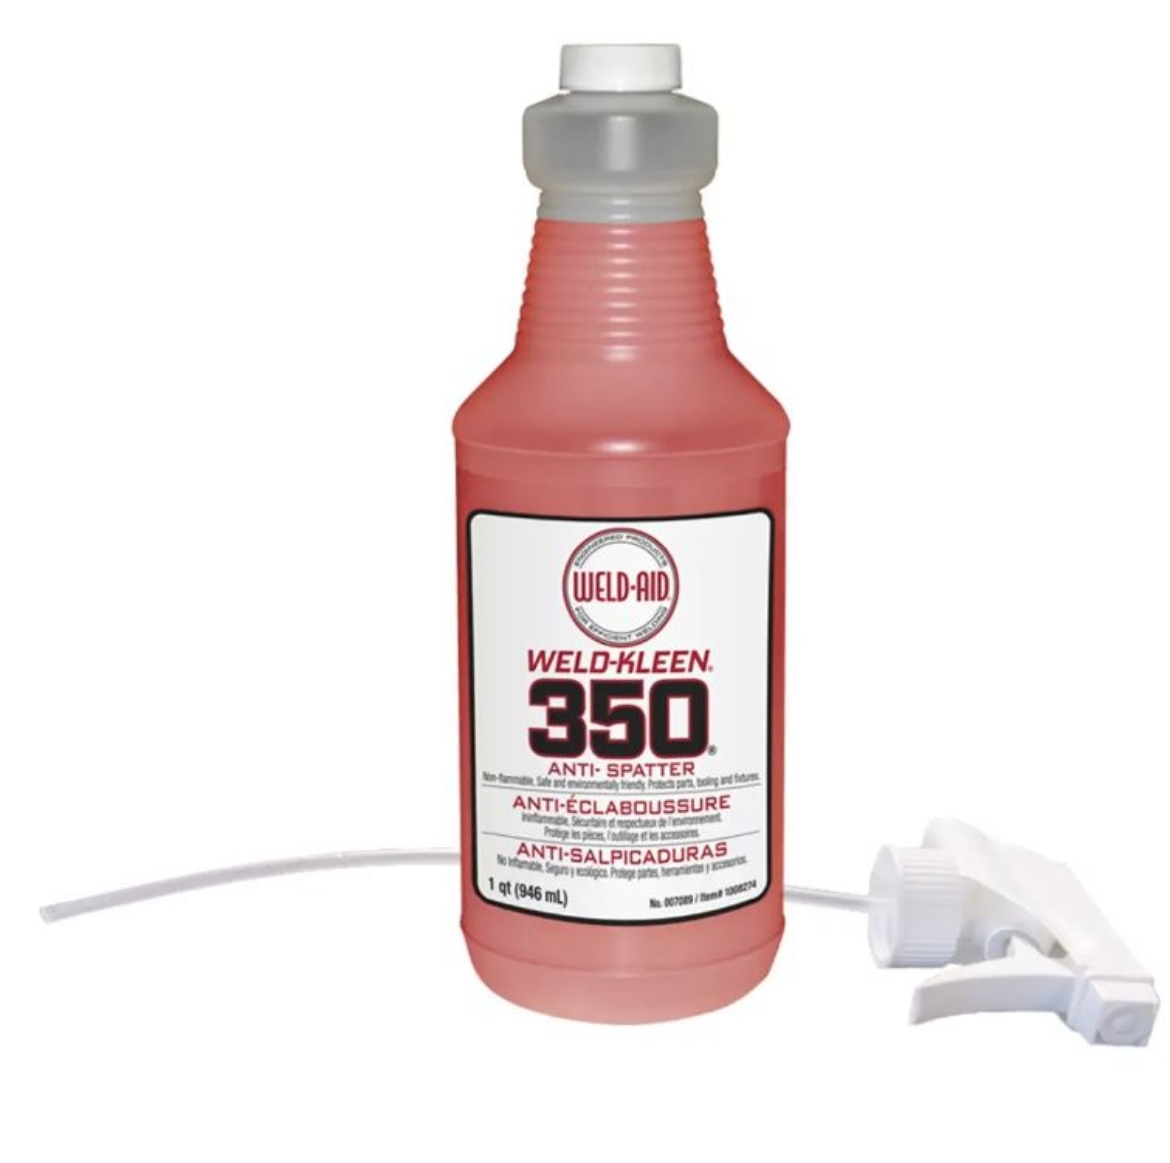 Picture of Weld-Aid Weld-Kleen 350 Anti-Spatter (32 oz)